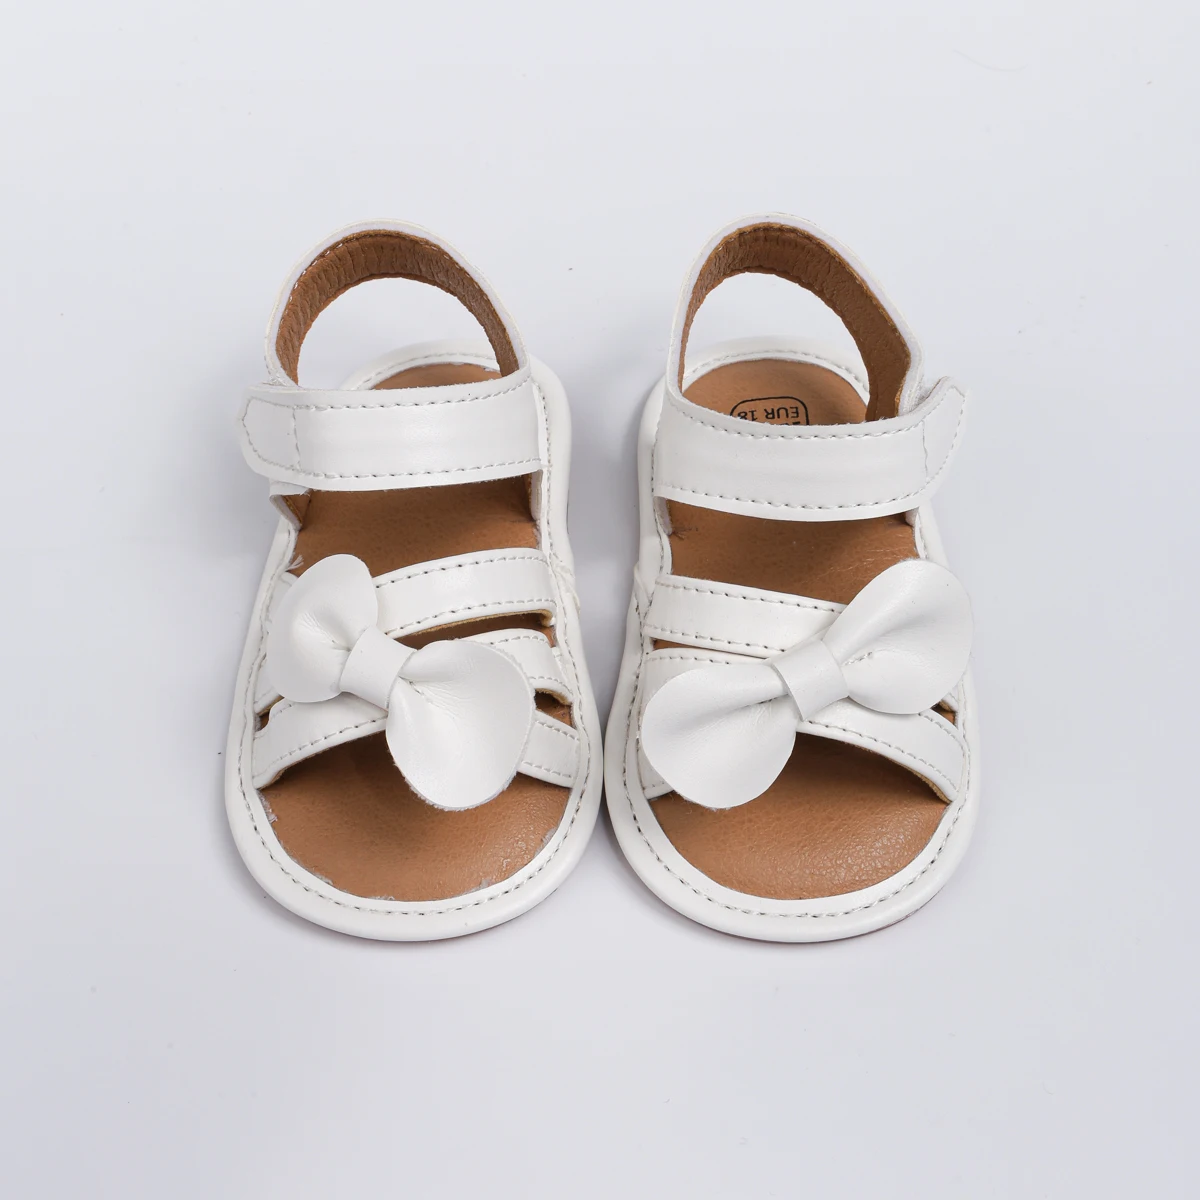 Factory Customized New Fashion PU Upper White Anti-Slip Sole Baby Sandals & Slippers Baby Shoes